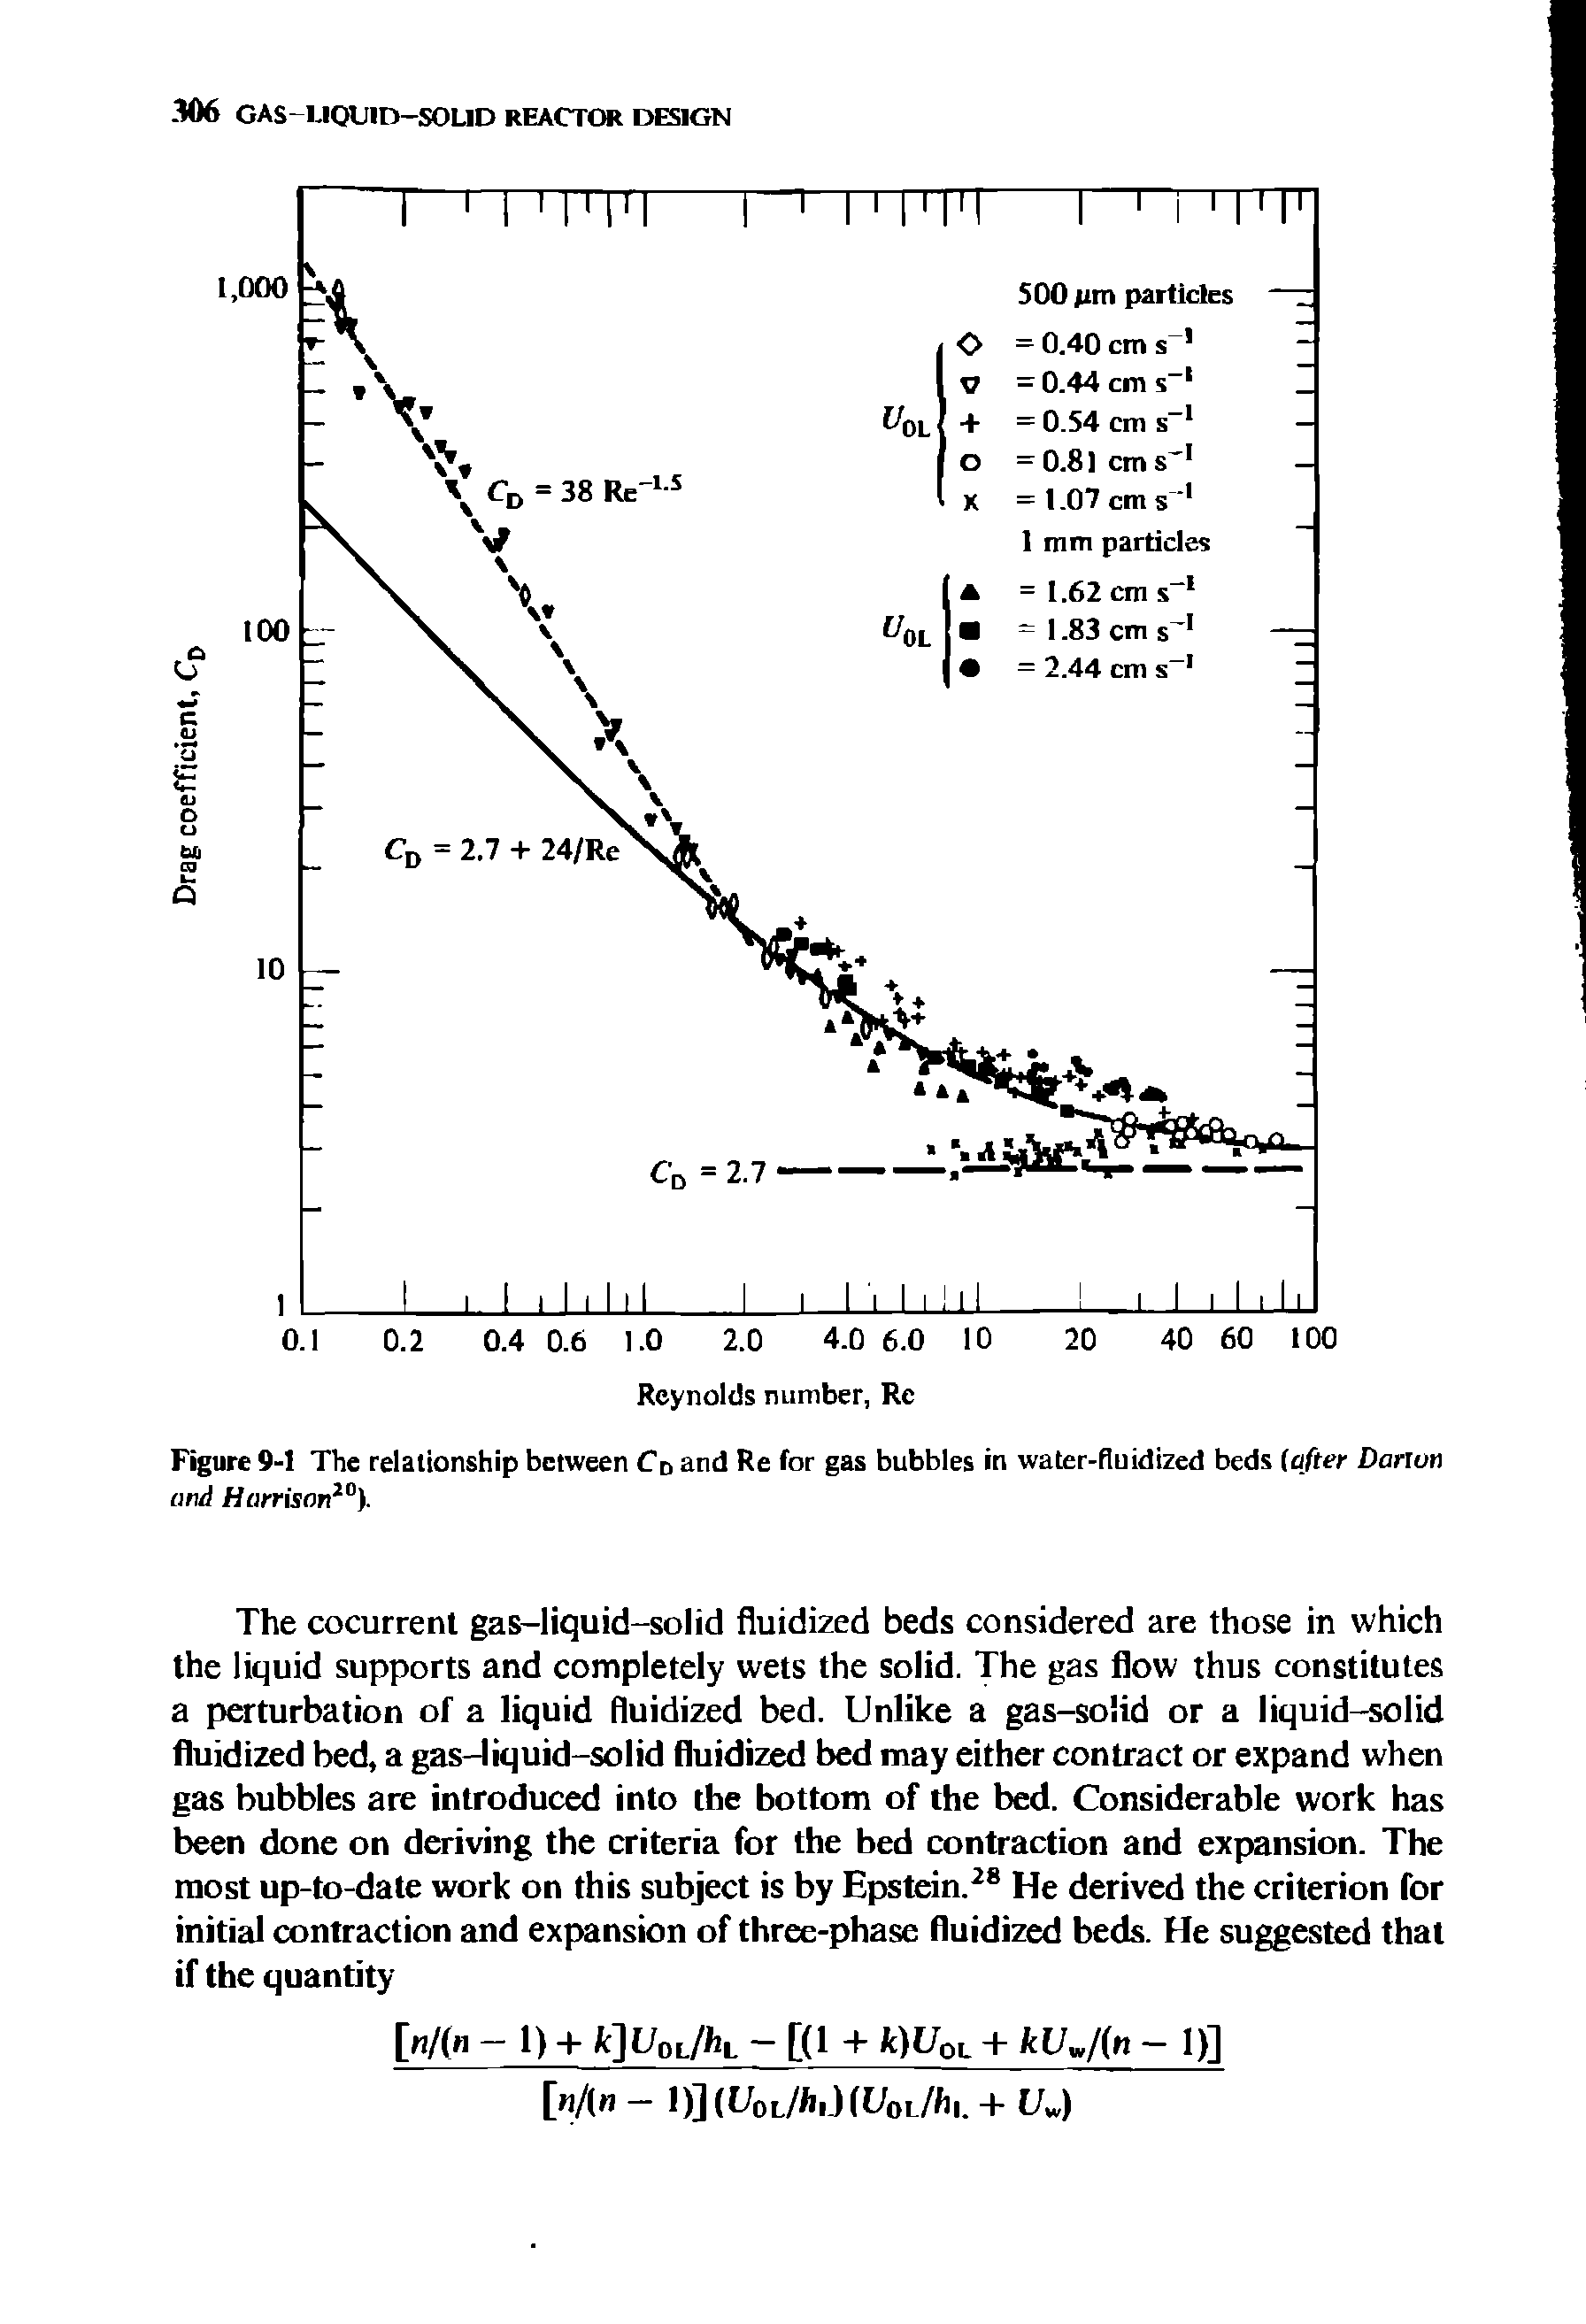 Figure 9-1 The relationship between Cd and Re for gas bubbles in water-fluidized beds (after Darwn and Harrison20).